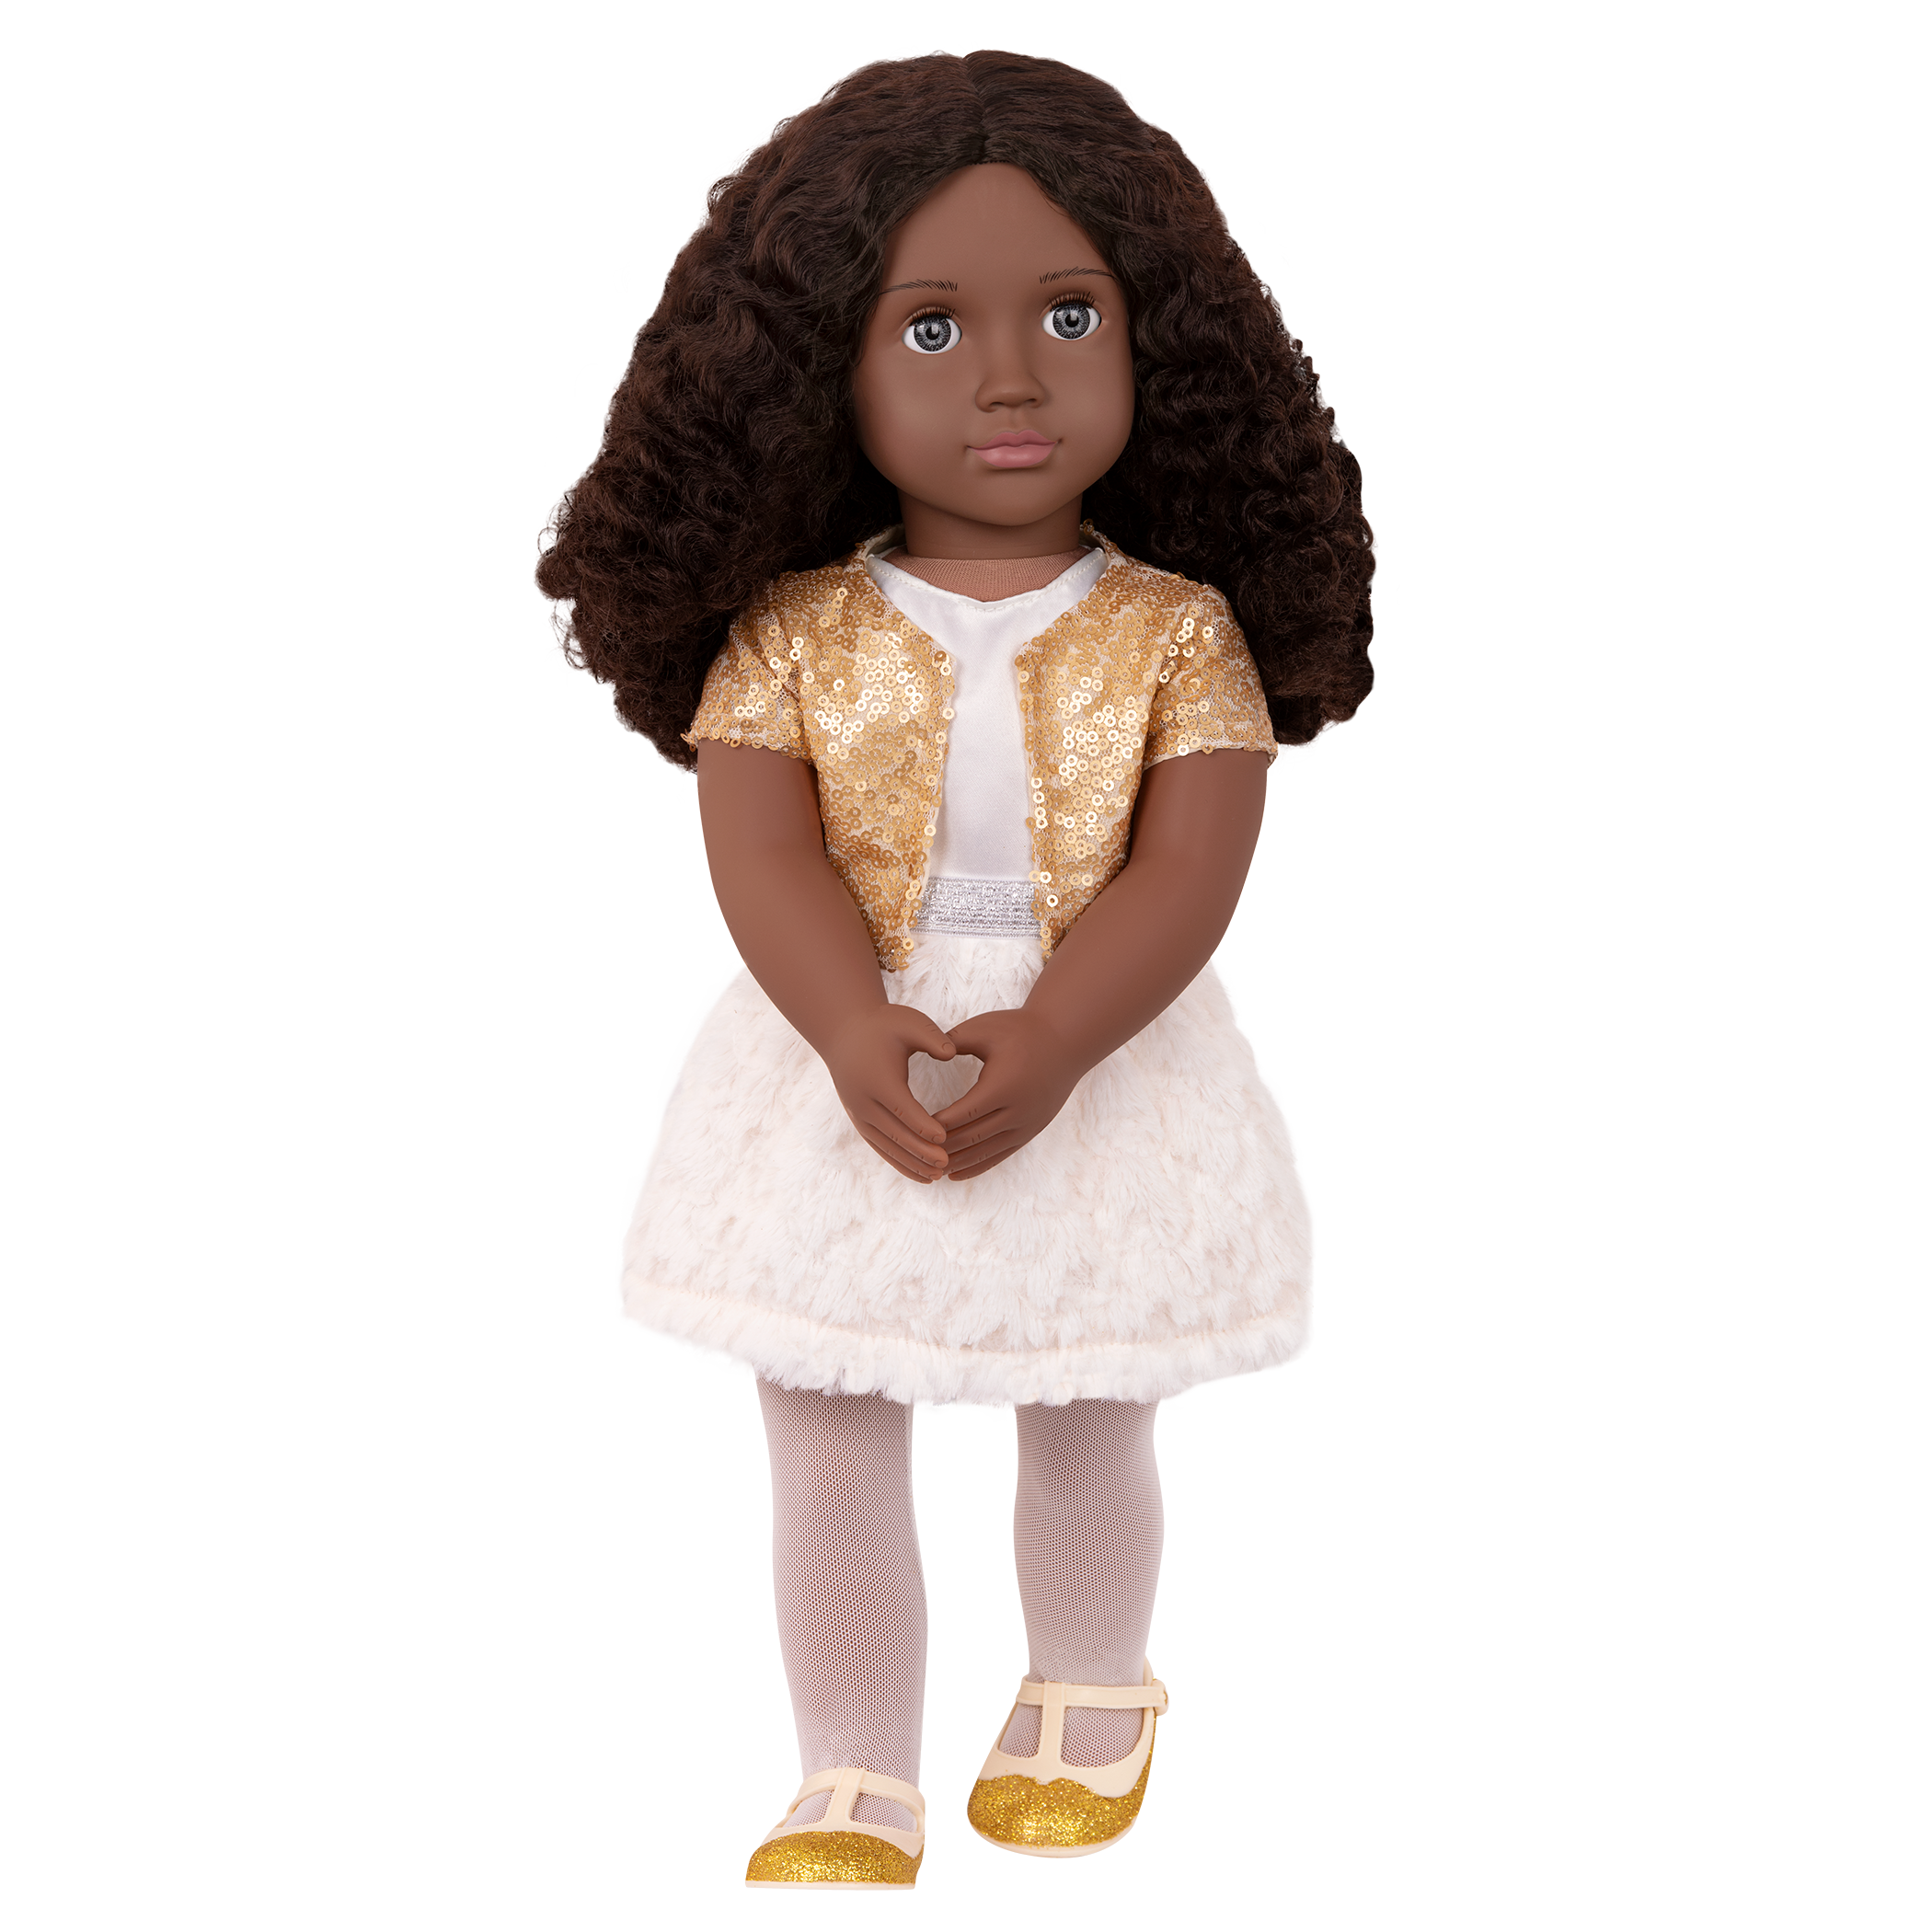 18-inch holiday doll with brown hair and gray eyes